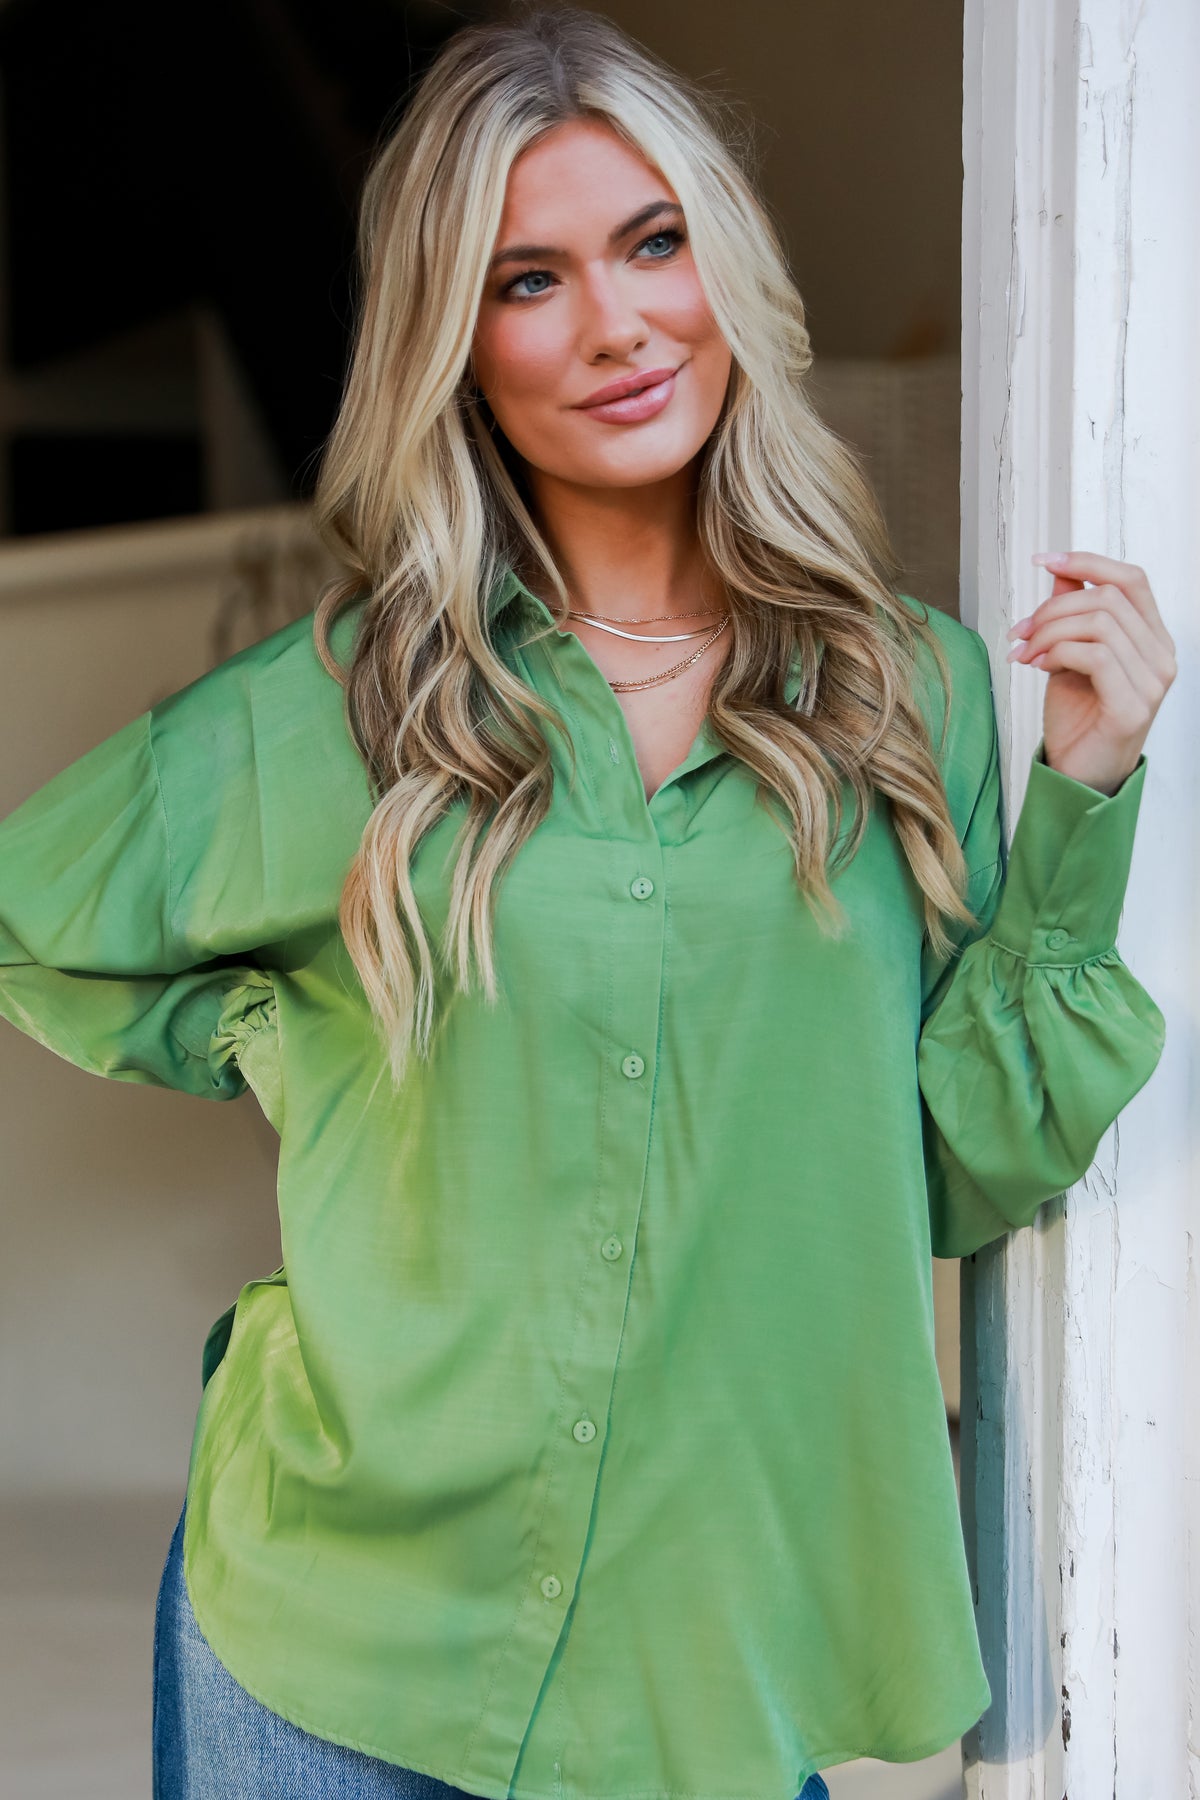 Satin Button-Up Blouses | Chic Tops For Women | Dress Up